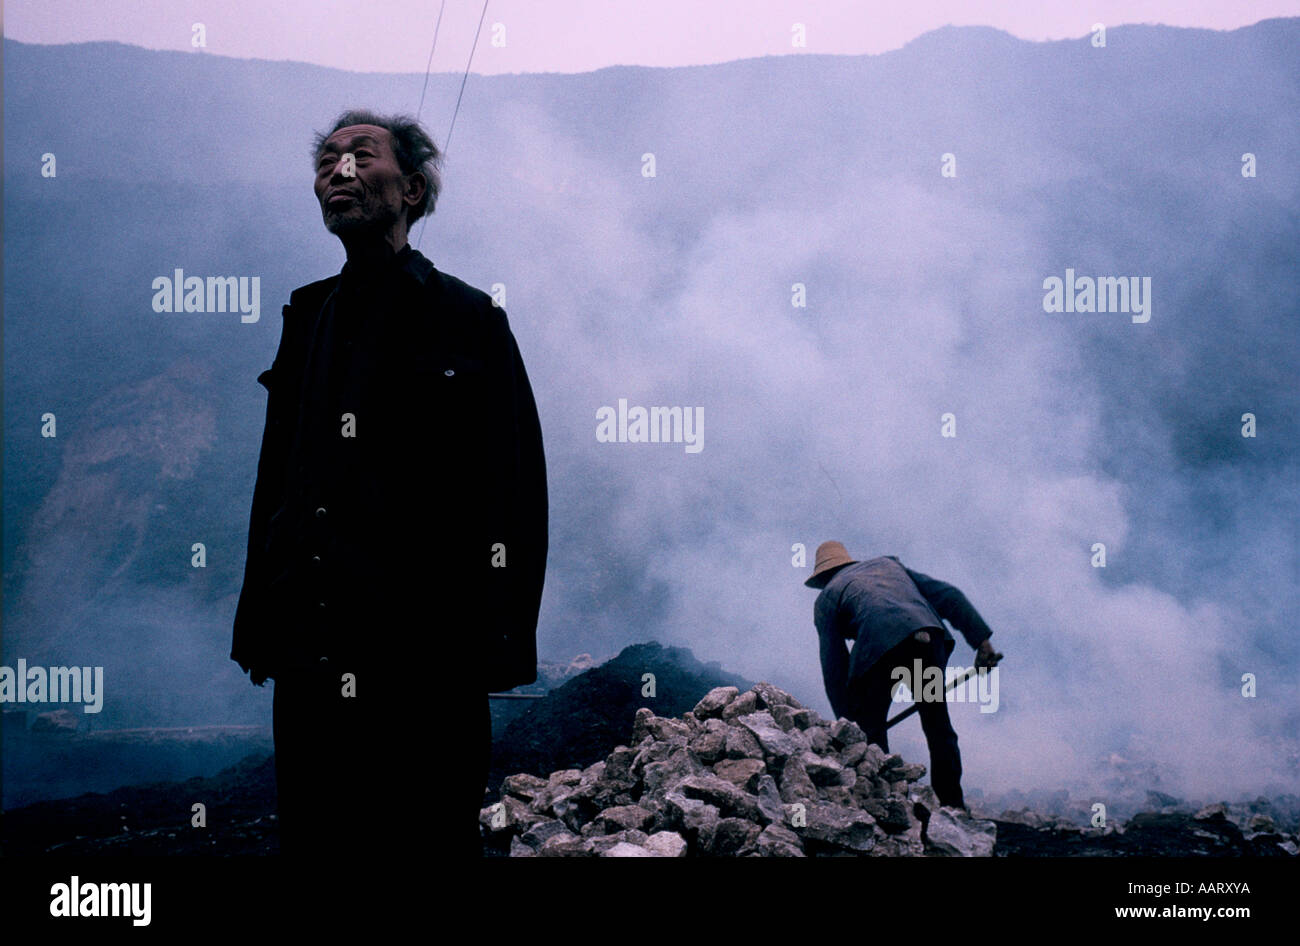 CHINA S ECONOMIC REFORMS MINERS ENRICHING COAL IN MAKESHIFT PITS BY THE ROADSIDE NEAR CHONGQUING 1999 Stock Photo